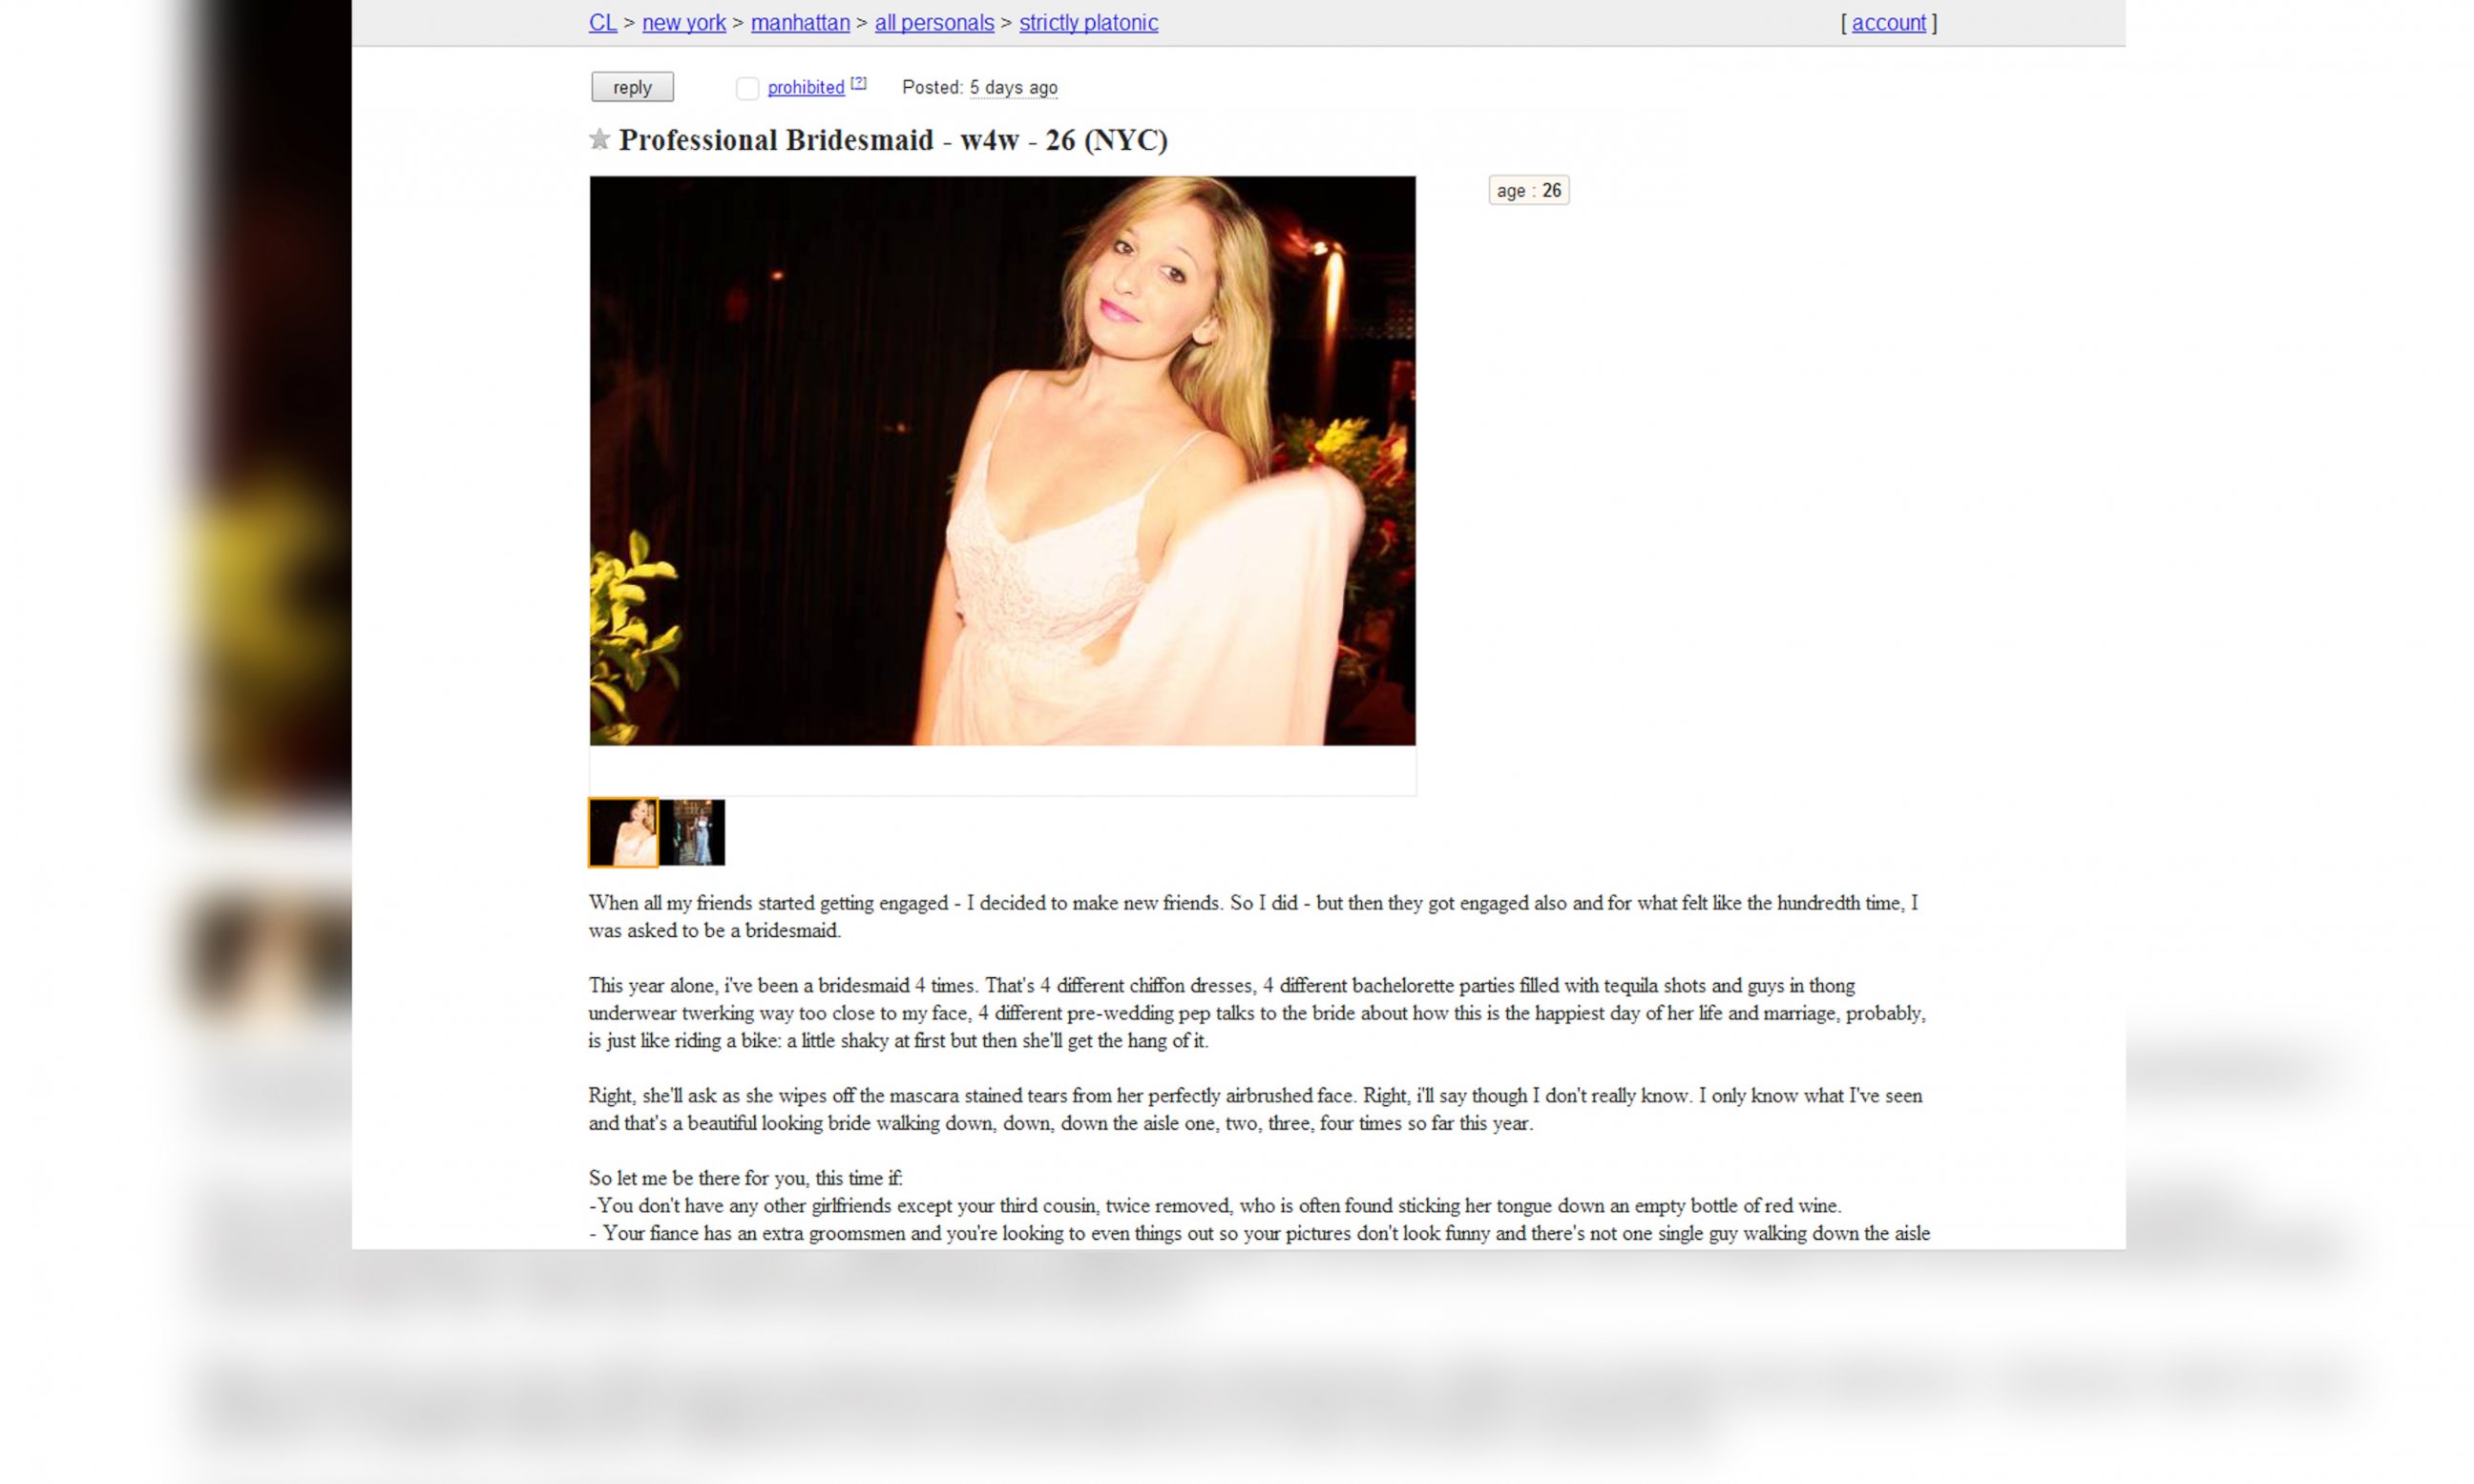 PHOTO: Jen Glantz from the New York City area posted this ad on Craigslist.com advertising her availability as a "Professional Bridesmaid," claiming to be "exceptionally good" at both the electric and the cha cha slide.